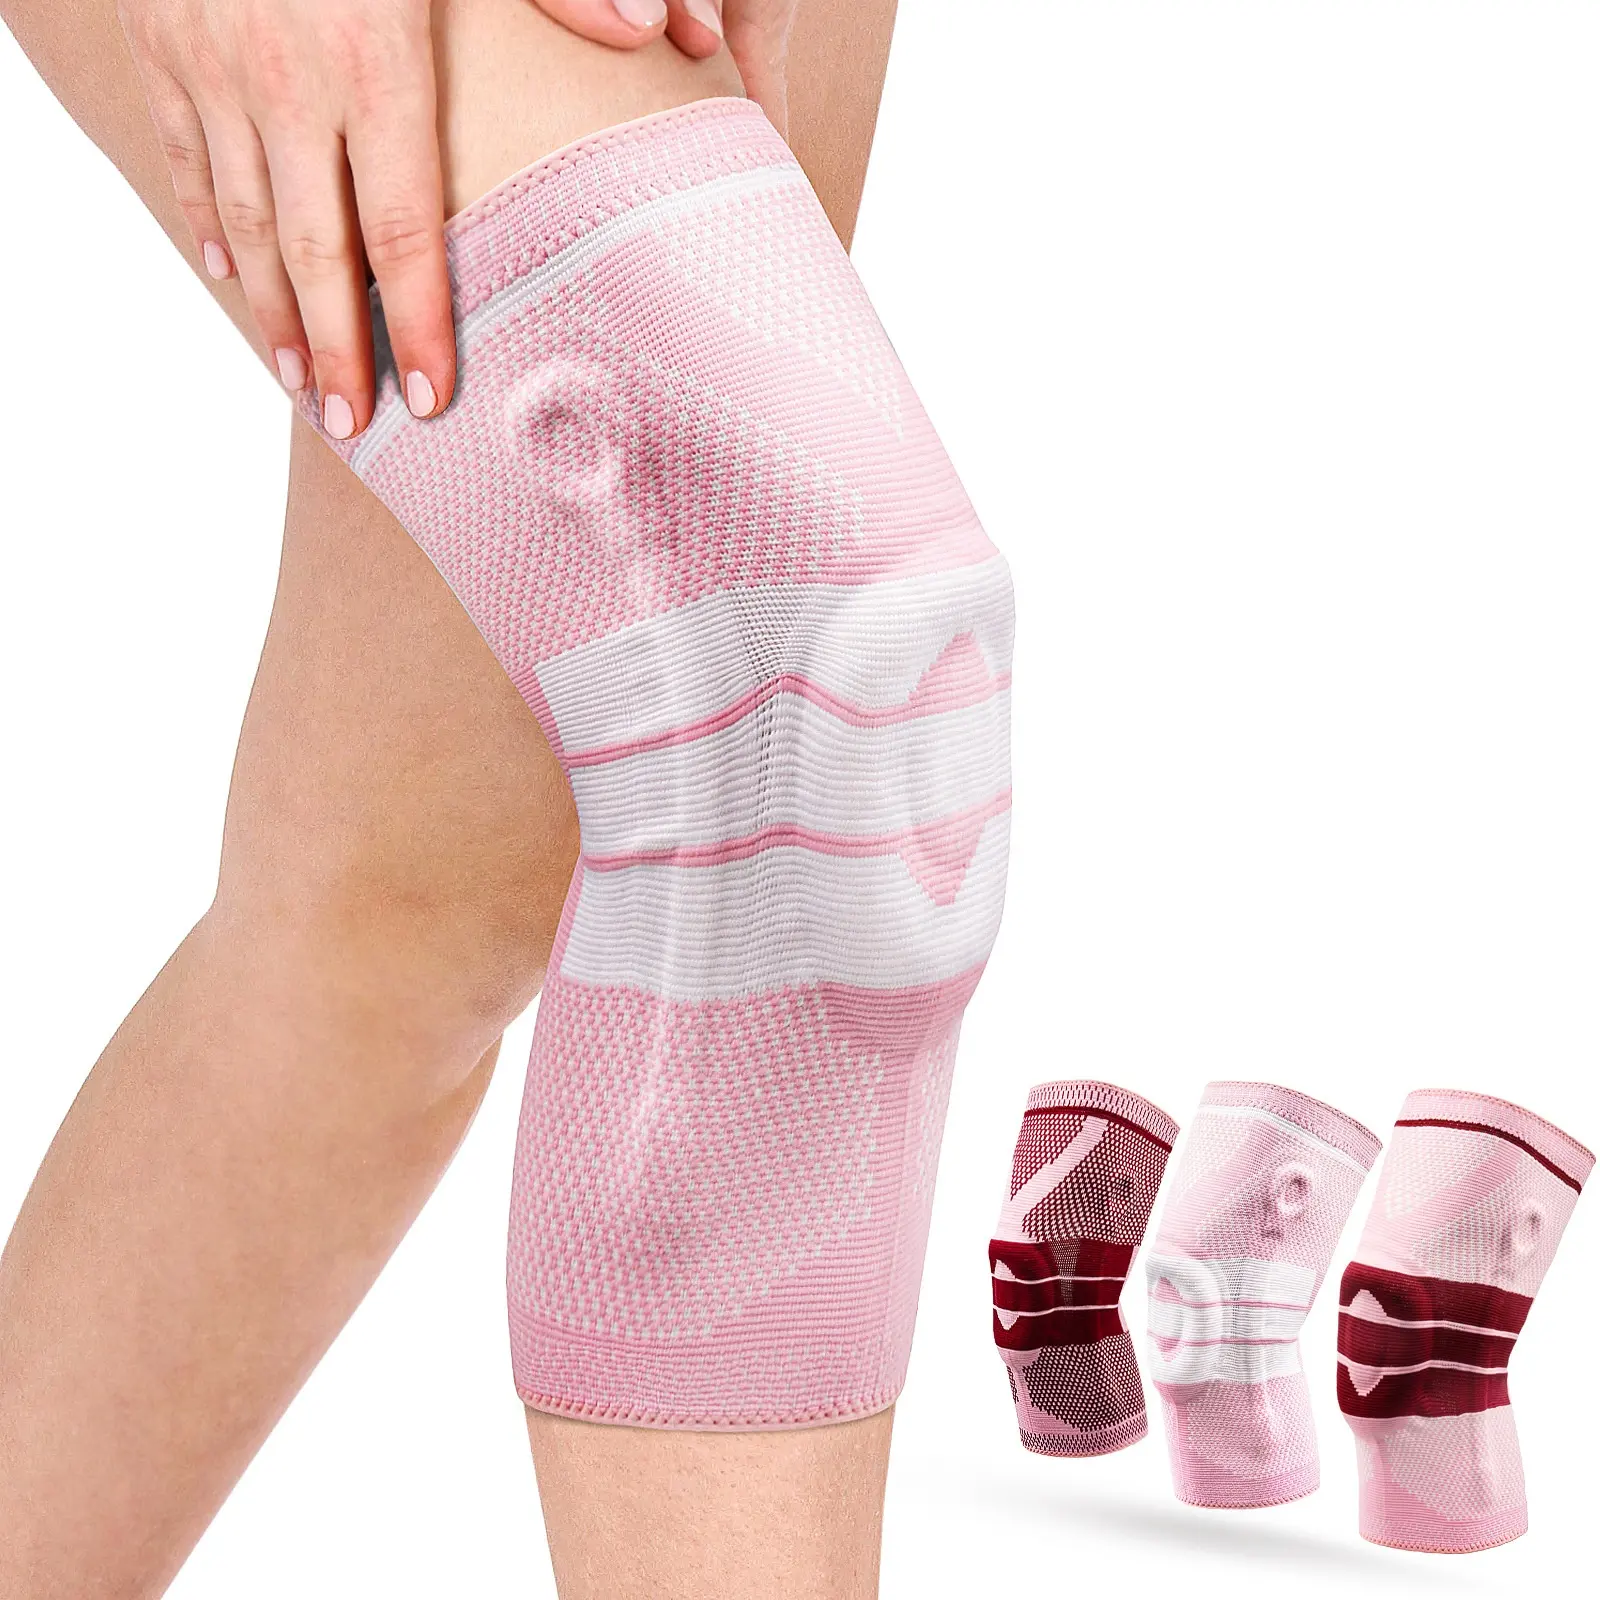 Wholesale New Design Knee Support Brace Compression Orthopedic Knee Pads for Knee Pain Relief